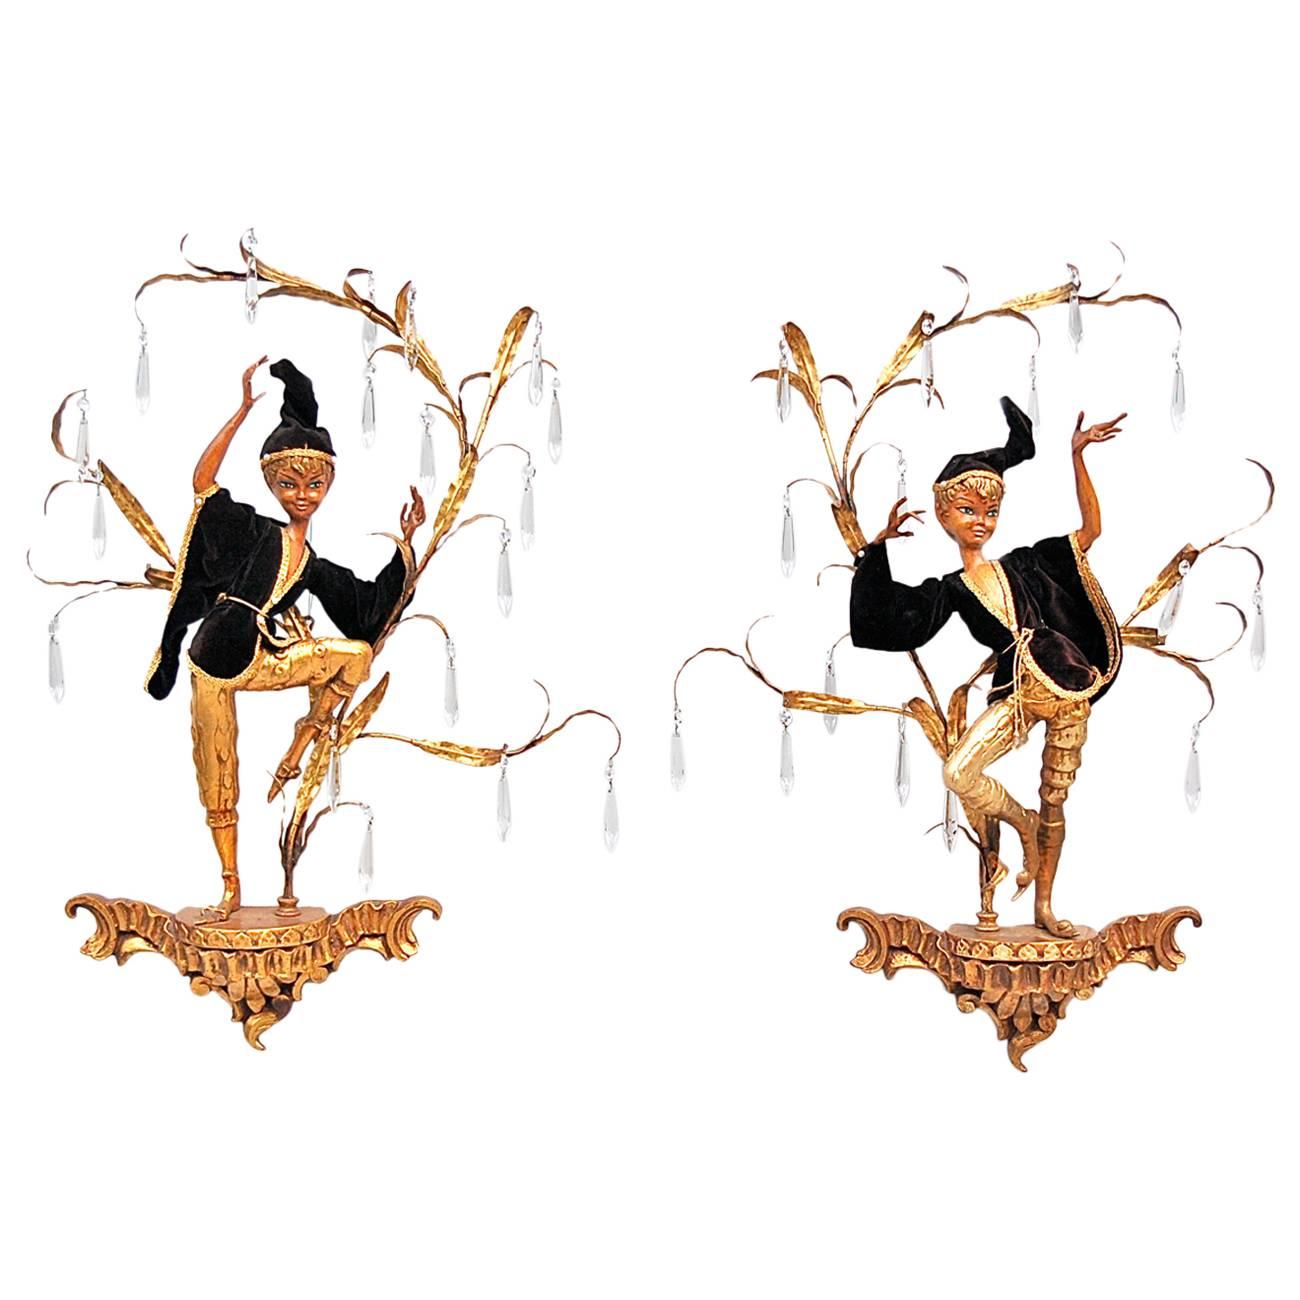 Magical wall mounted figurines, 1960s Italy For Sale